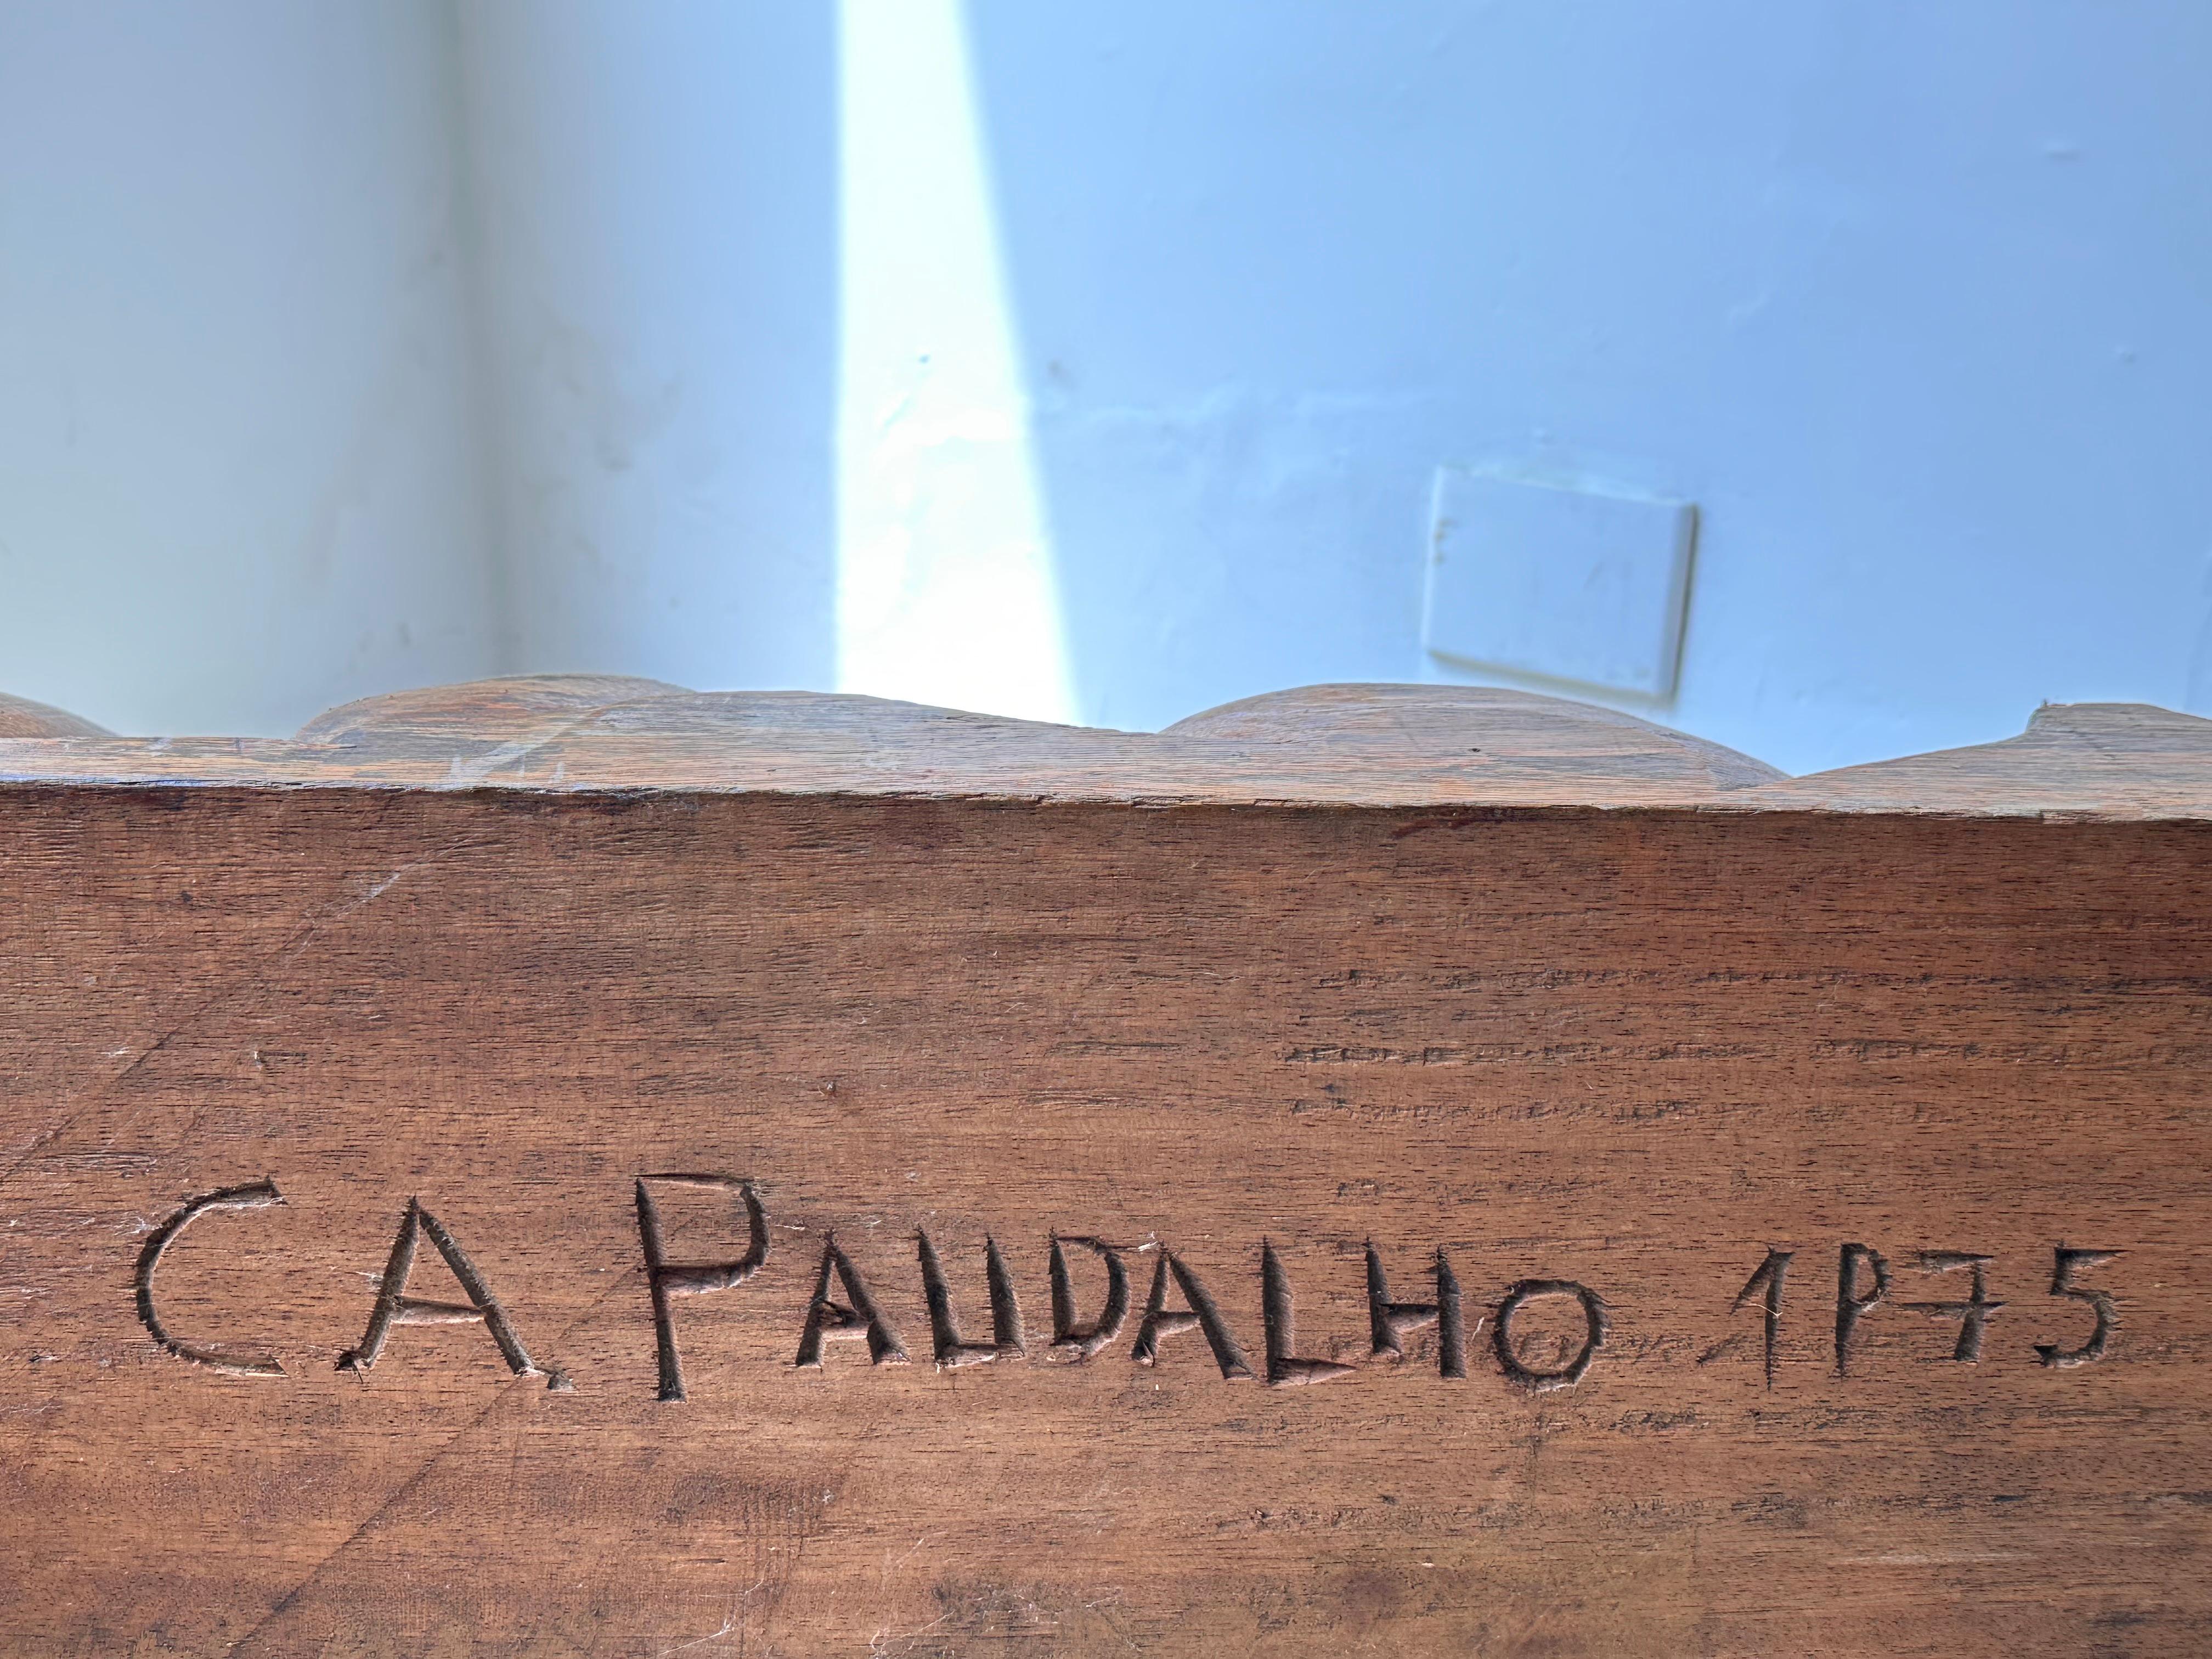 C.A Paudalho. Artisan Center Table in Wood For Sale 8